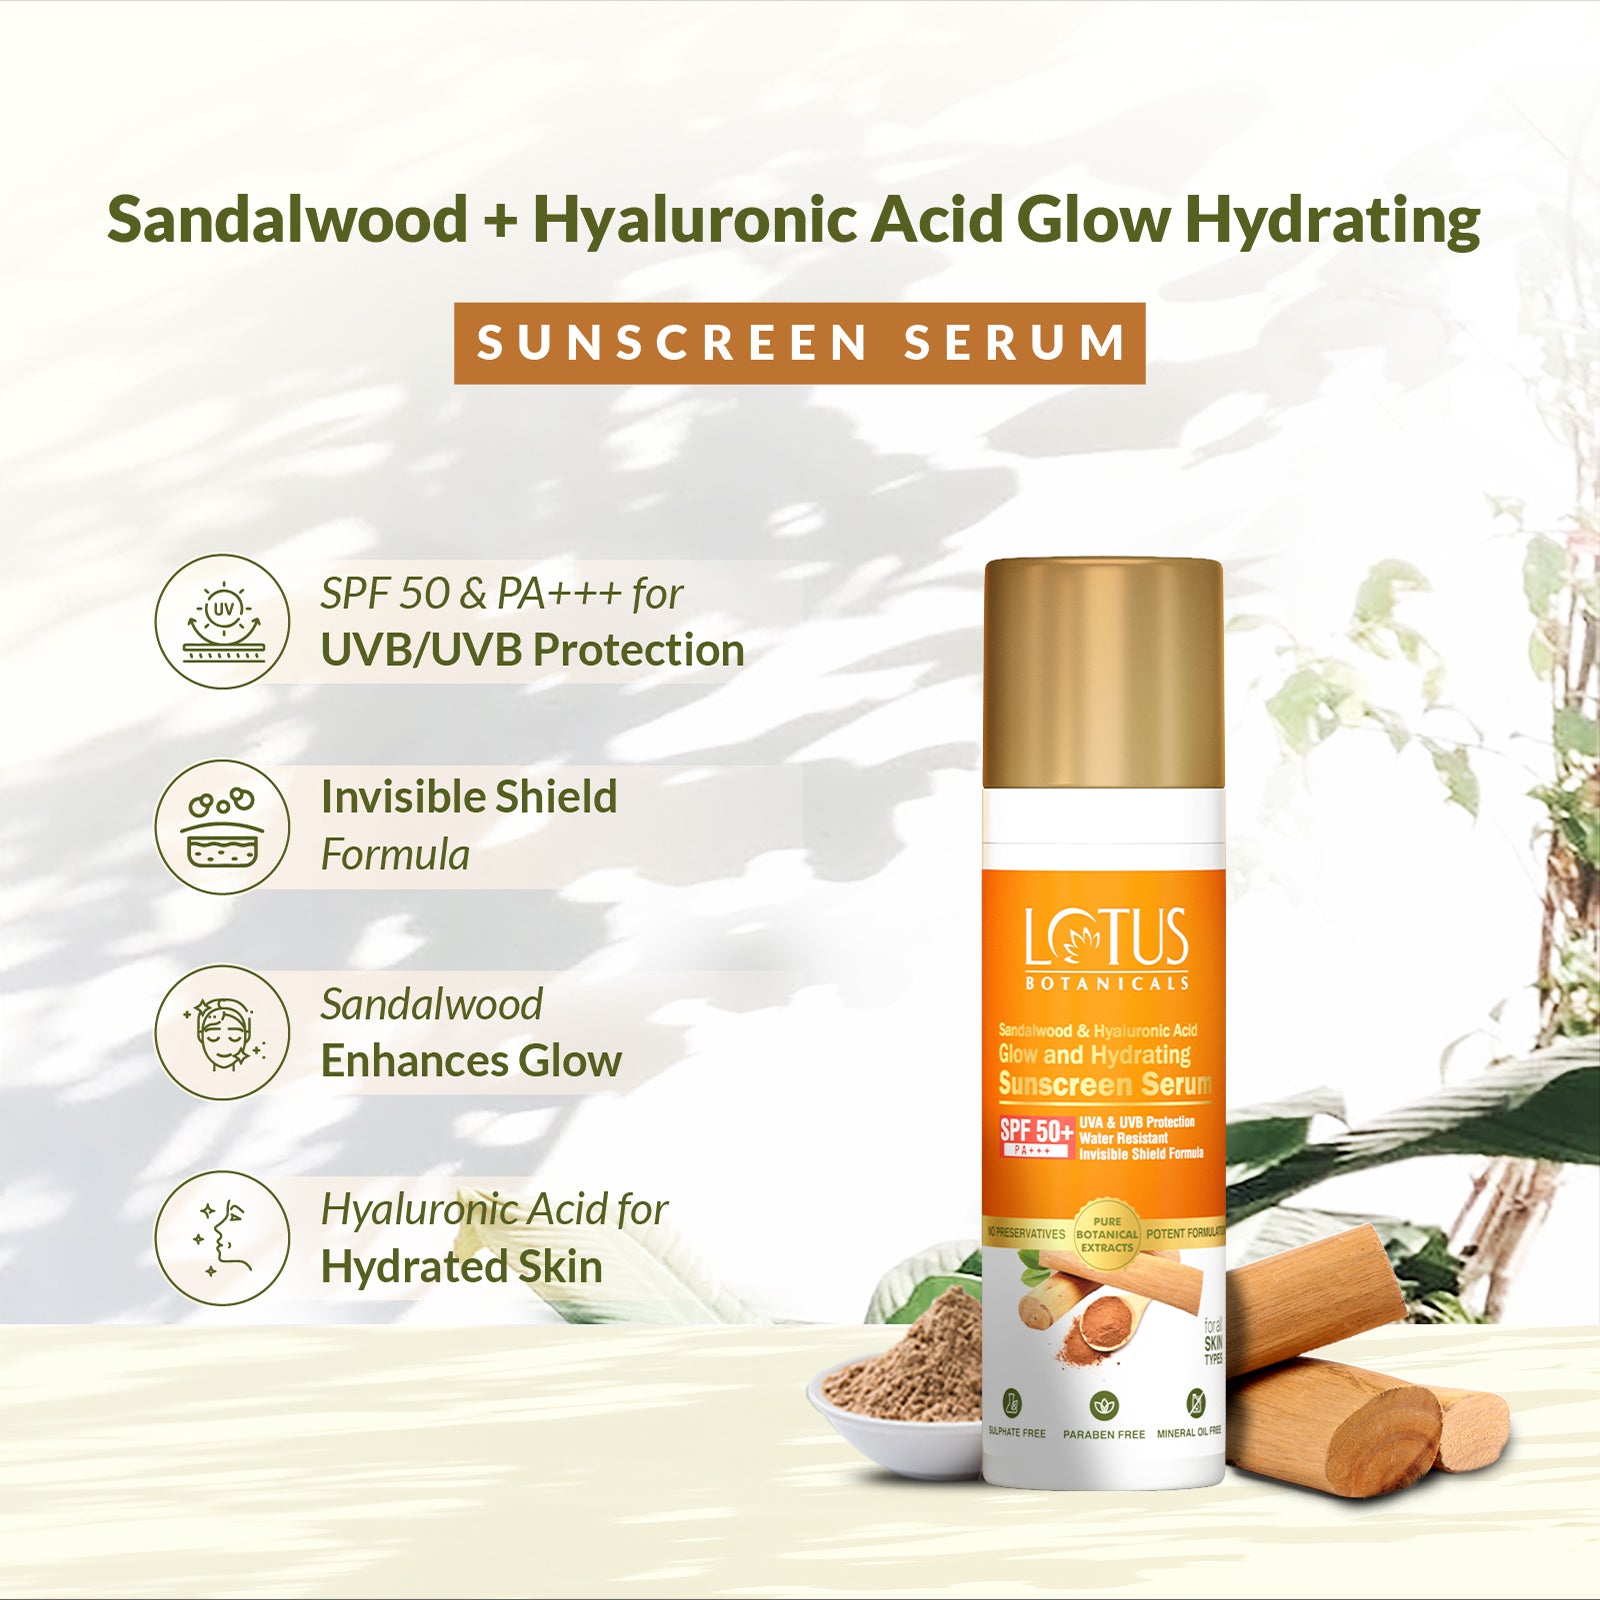 Sandalwood & Hyaluronic Acid Glow and Hydrating Sunscreen Serum with SPF50+ and PA+++ - Protects and Nourishes Skin with Natural Ingredients